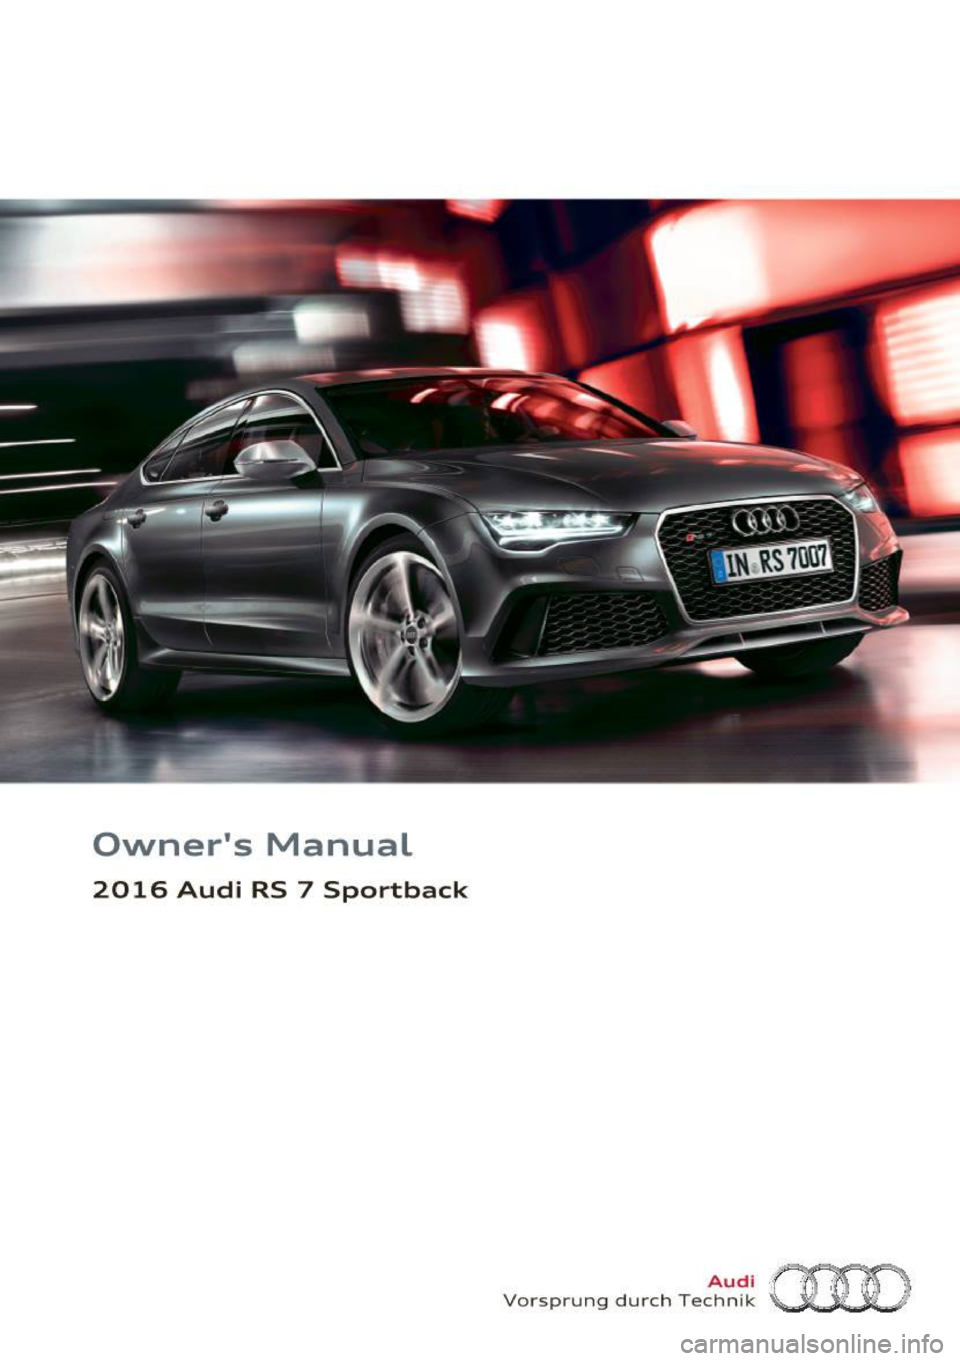 AUDI RS7 SPORTBACK 2016  Owners Manual Owners  Manual 
2016  Audi  RS  7  Sportback 
Vorsprung  durch  Te~~?~ am  